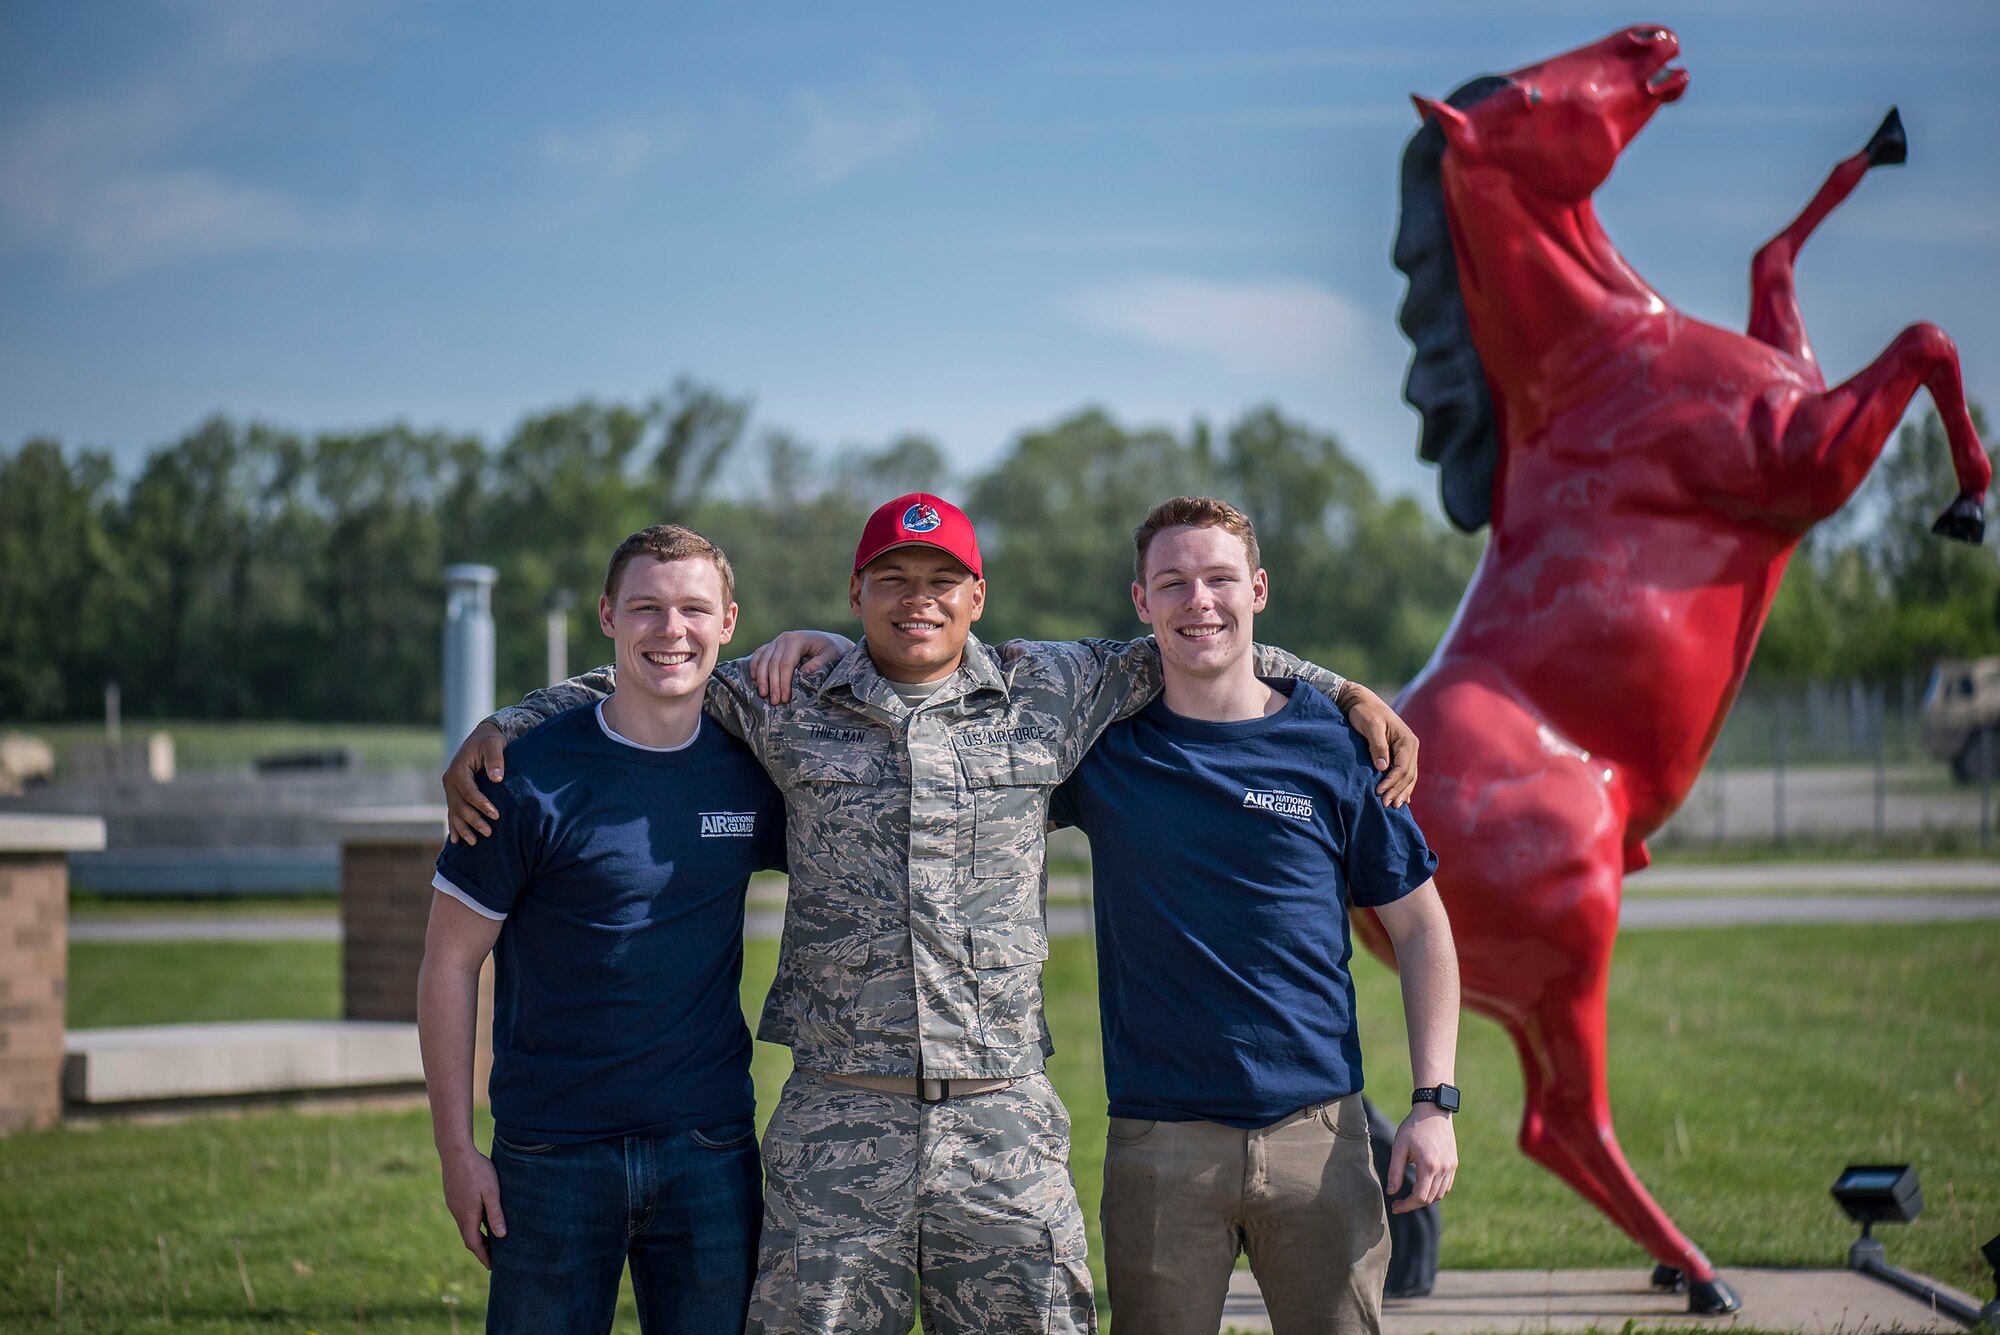 Brothers Tyler Jenkins, Senior Airman Anthony Thielman and Dylan Jenkins, all members of the 200th REDHORSE Squadron, May 19, 2019, at the 200th REDHORSE Squadron, Mansfield, Ohio. Dylan and Tyler recently enlisted into the Ohio Air Guard, following in the footsteps of their older brother.